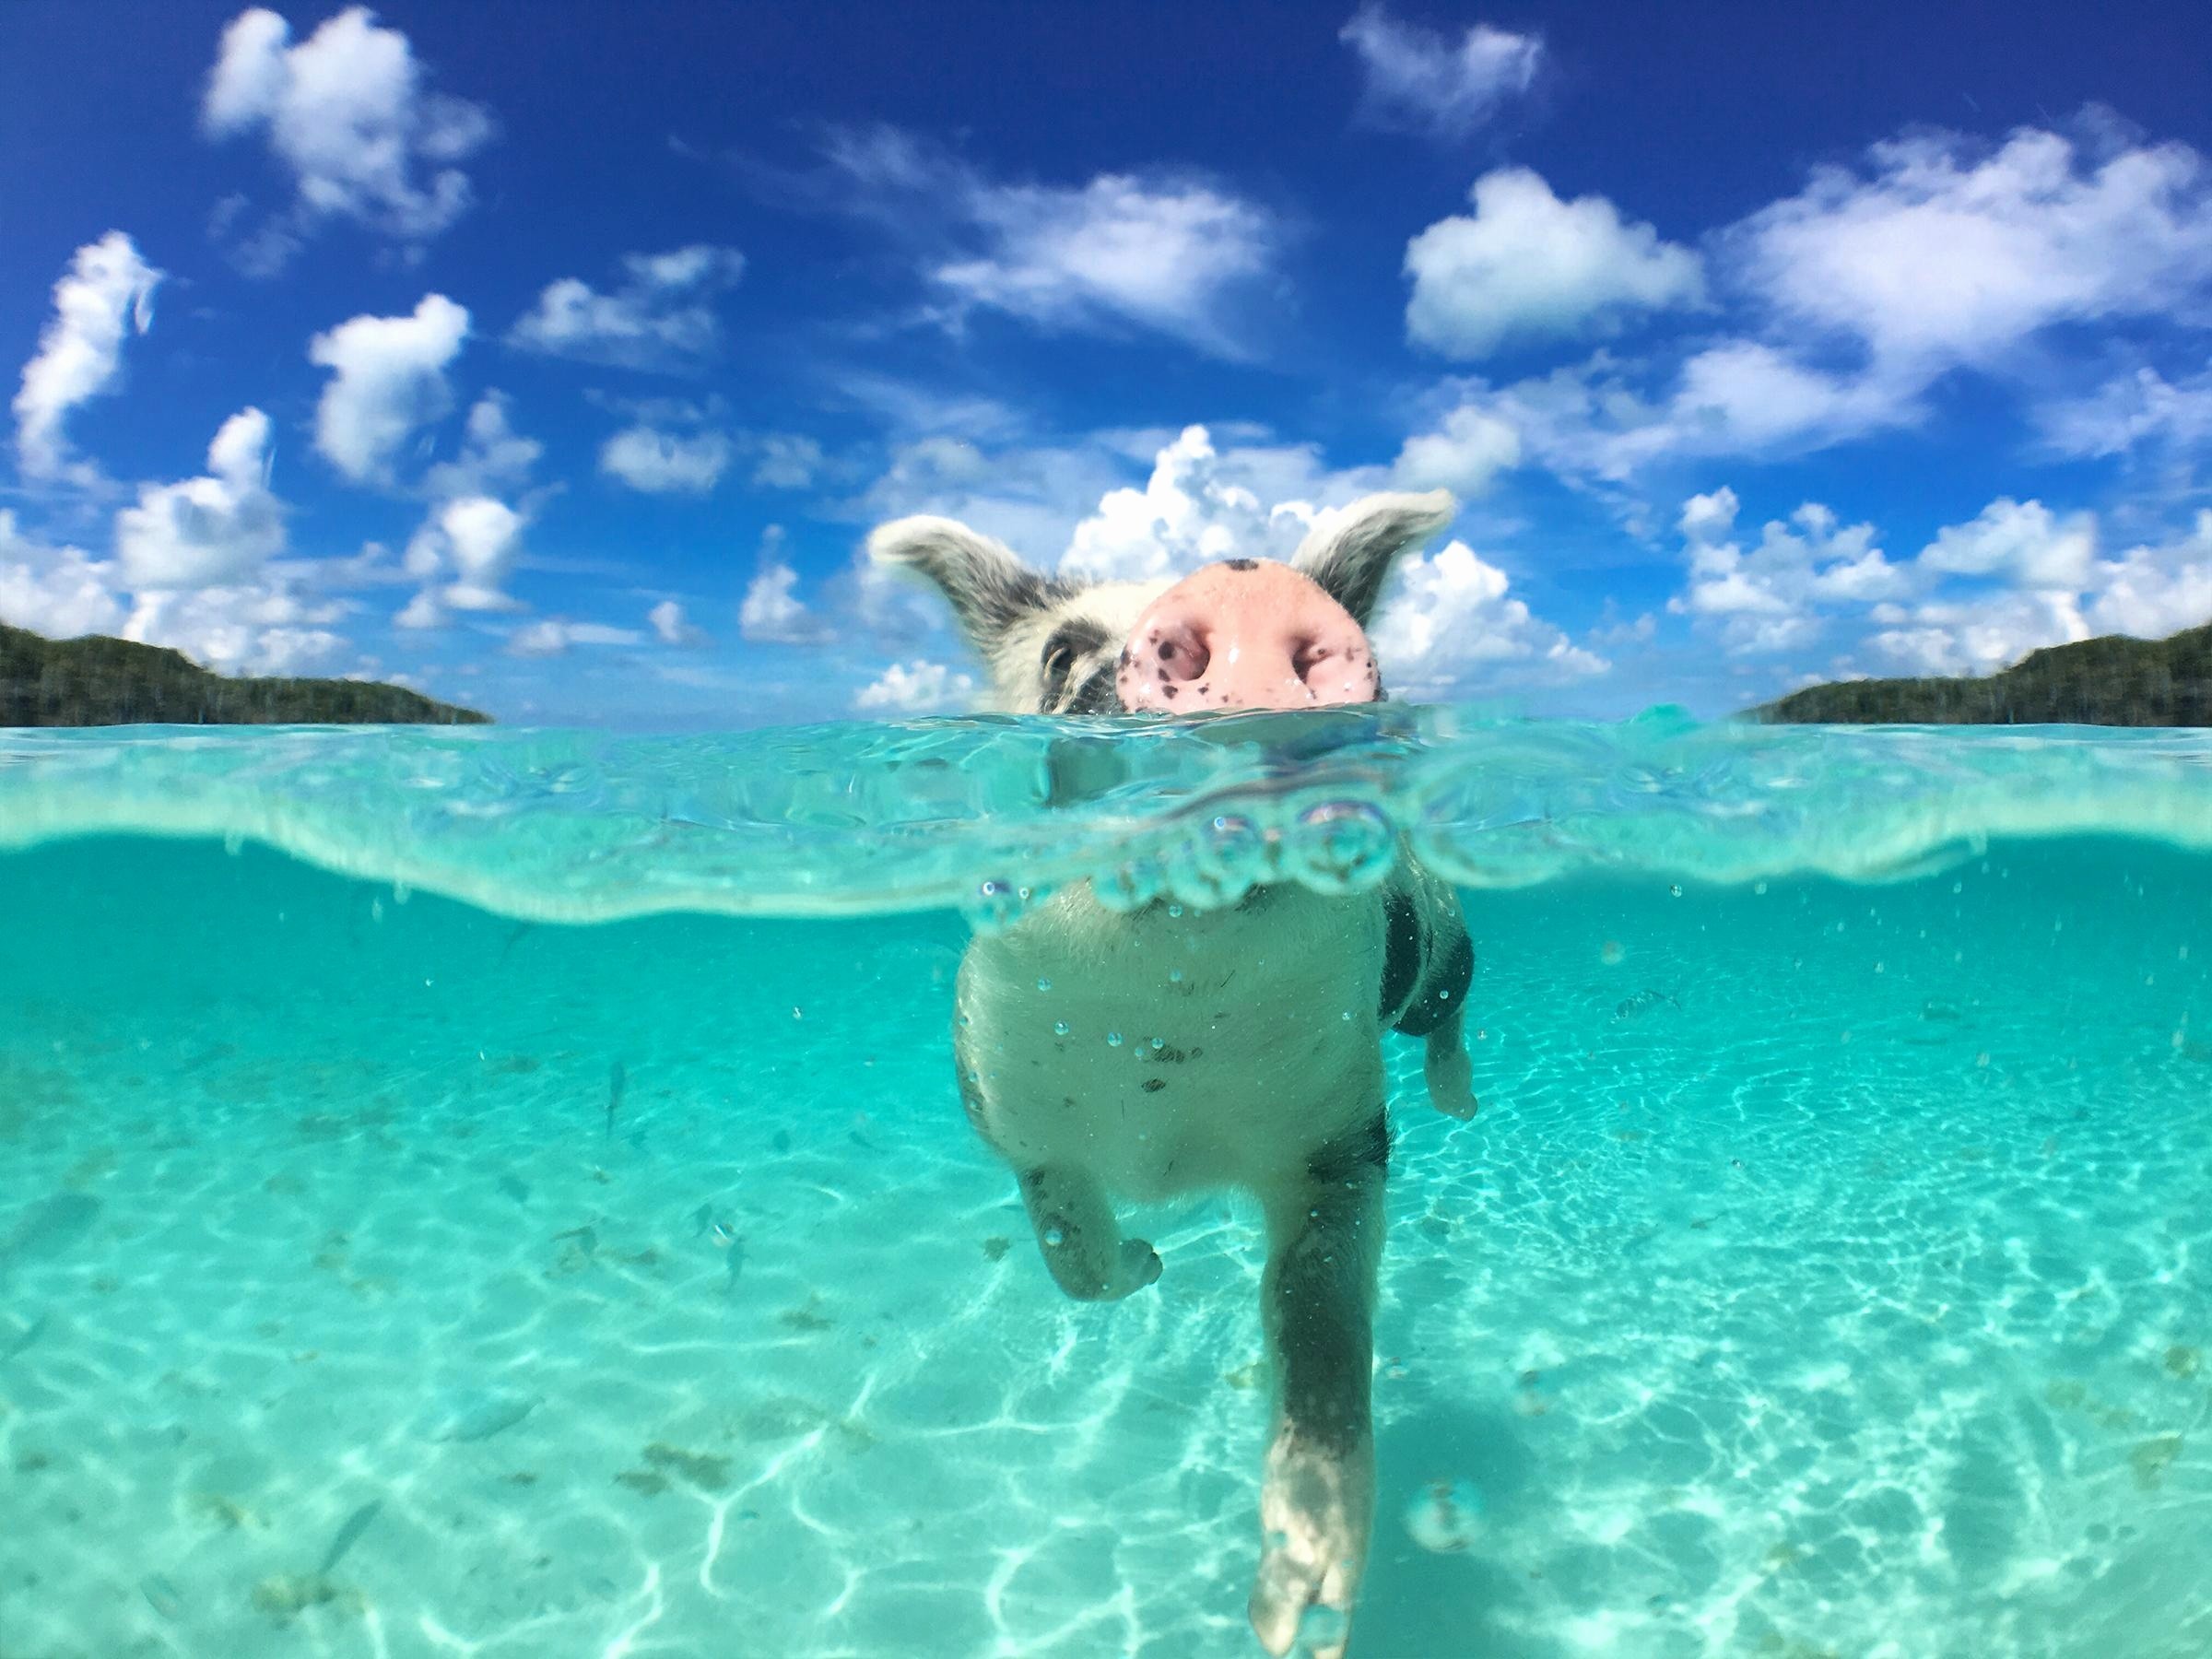 2400x1800 Bahamas Wallpaper Beautiful Pigs In the Bahamas Wallpapers High Quality